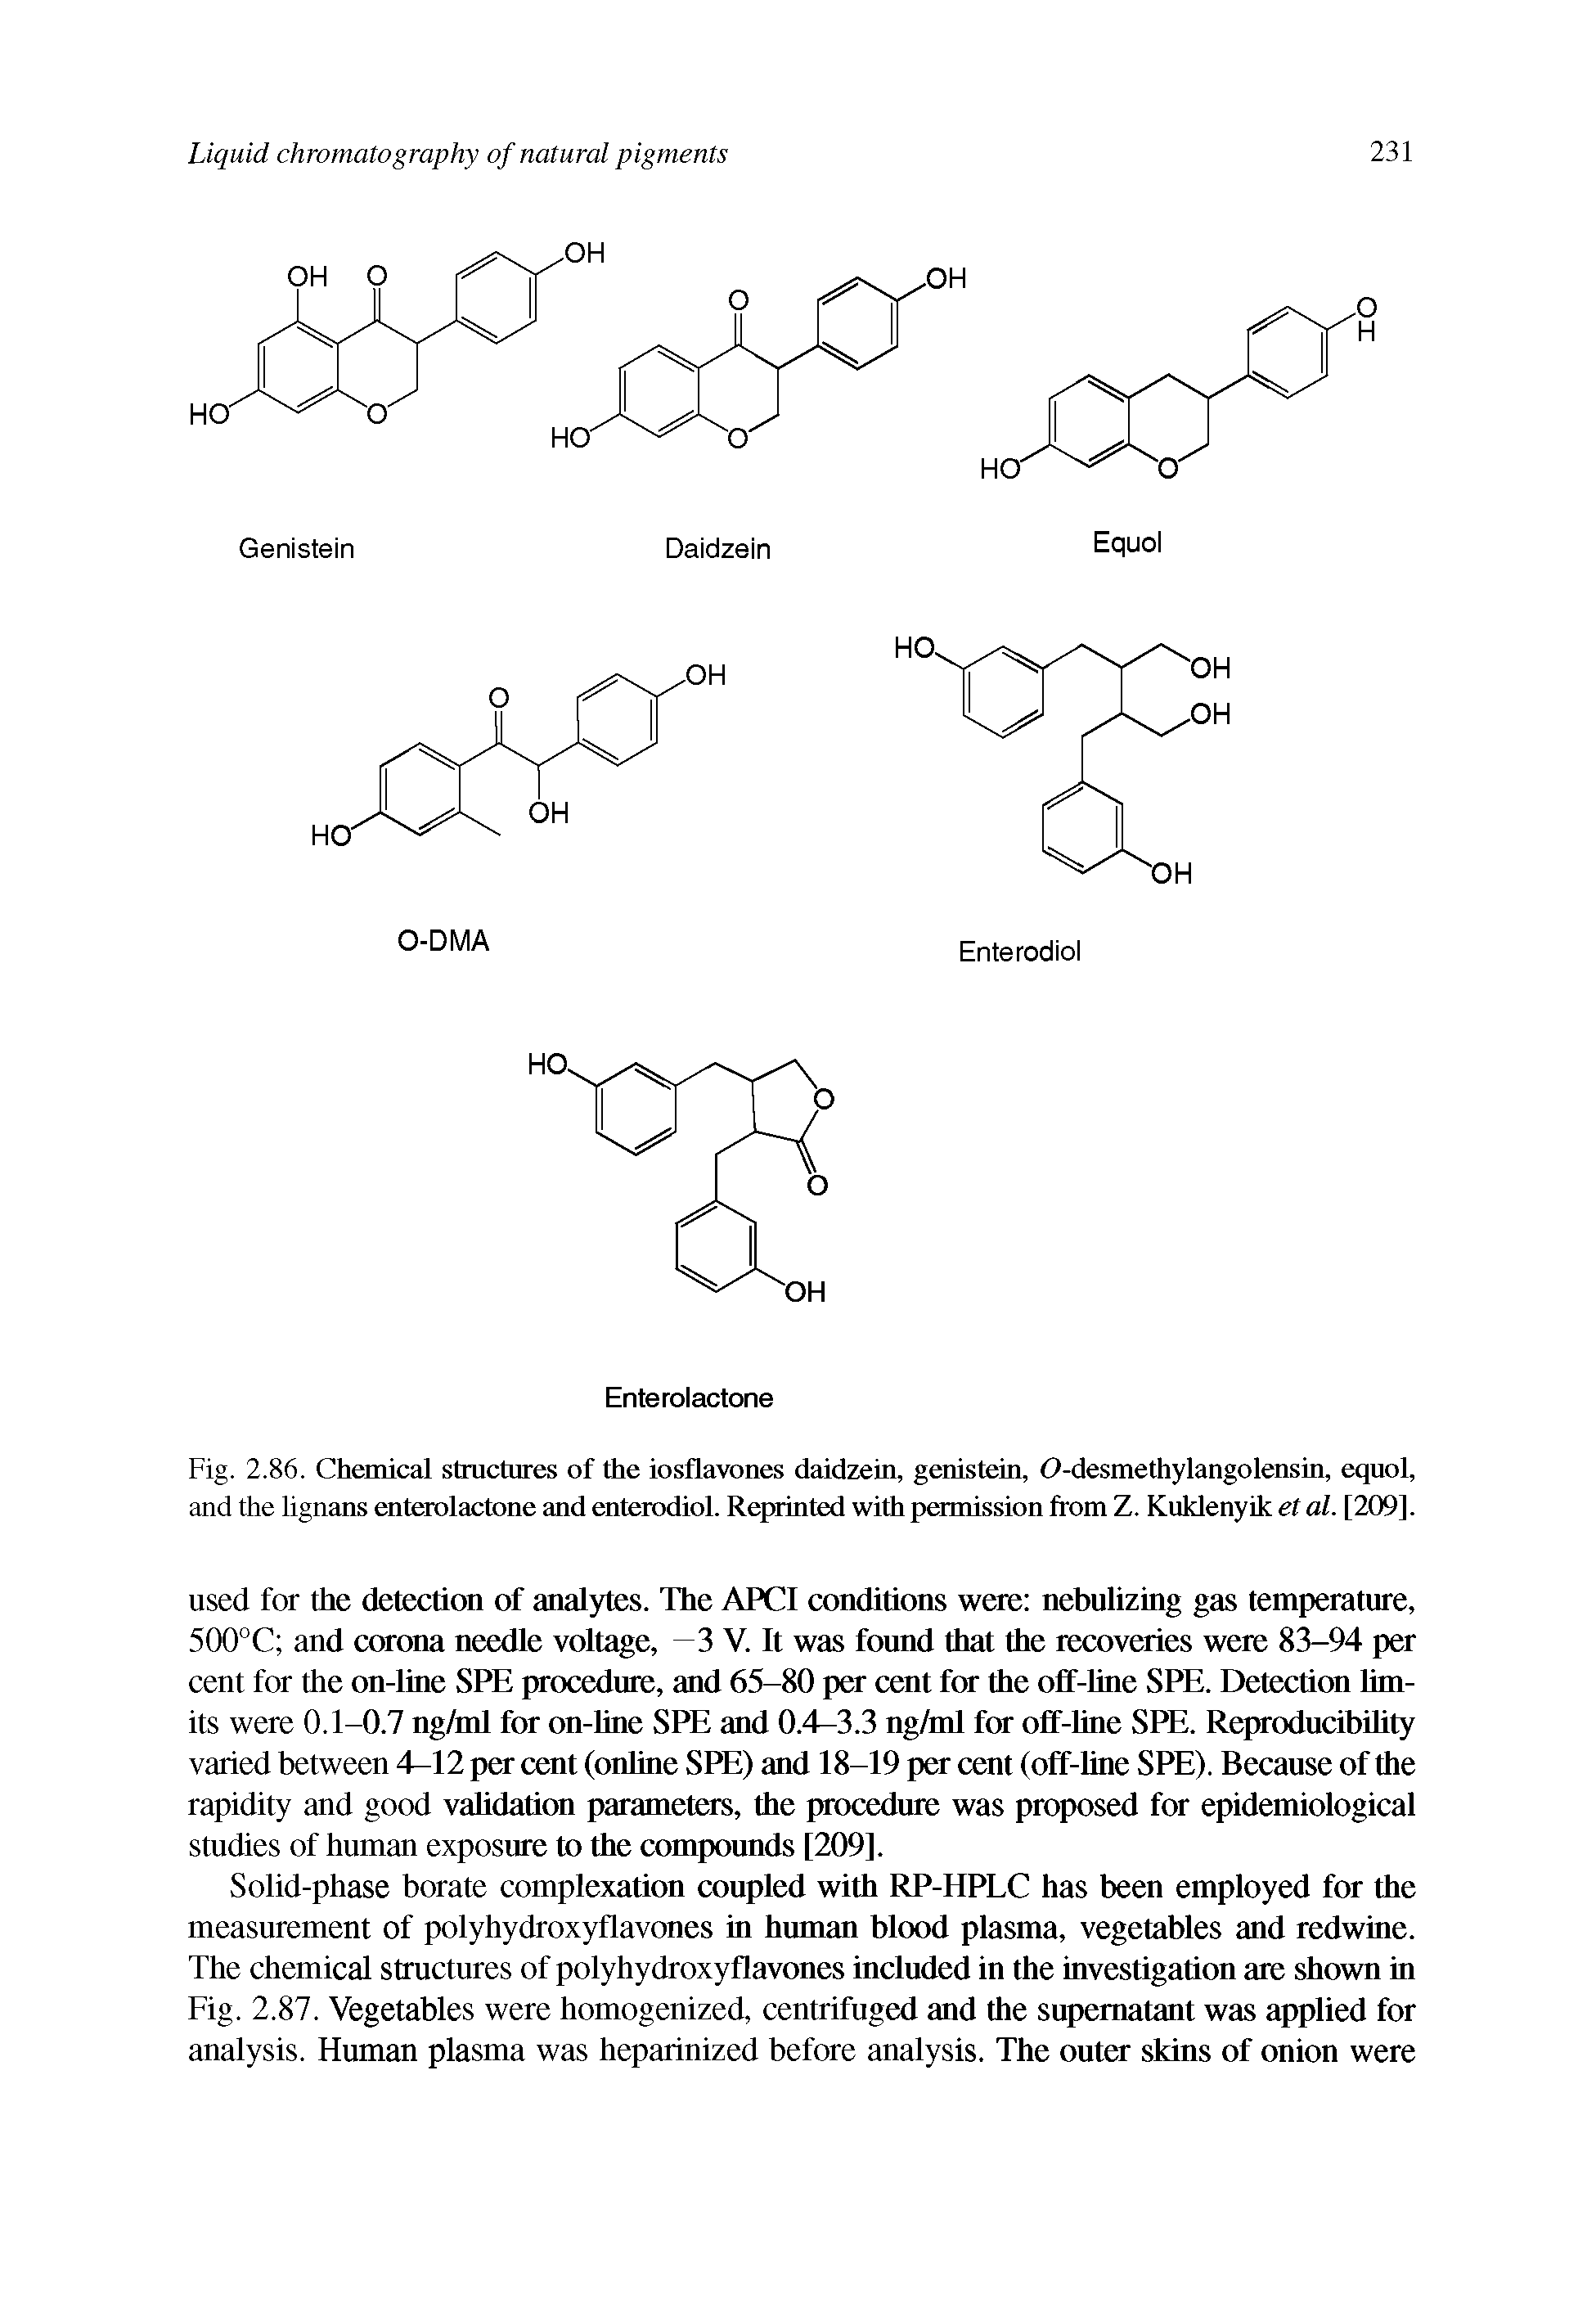 Fig. 2.86. Chemical structures of the iosflavones daidzein, genistein, O-desmethylangolensin, equol, and the lignans enterolactone and enterodiol. Reprinted with permission from Z. Kuklenyik el al. [209].